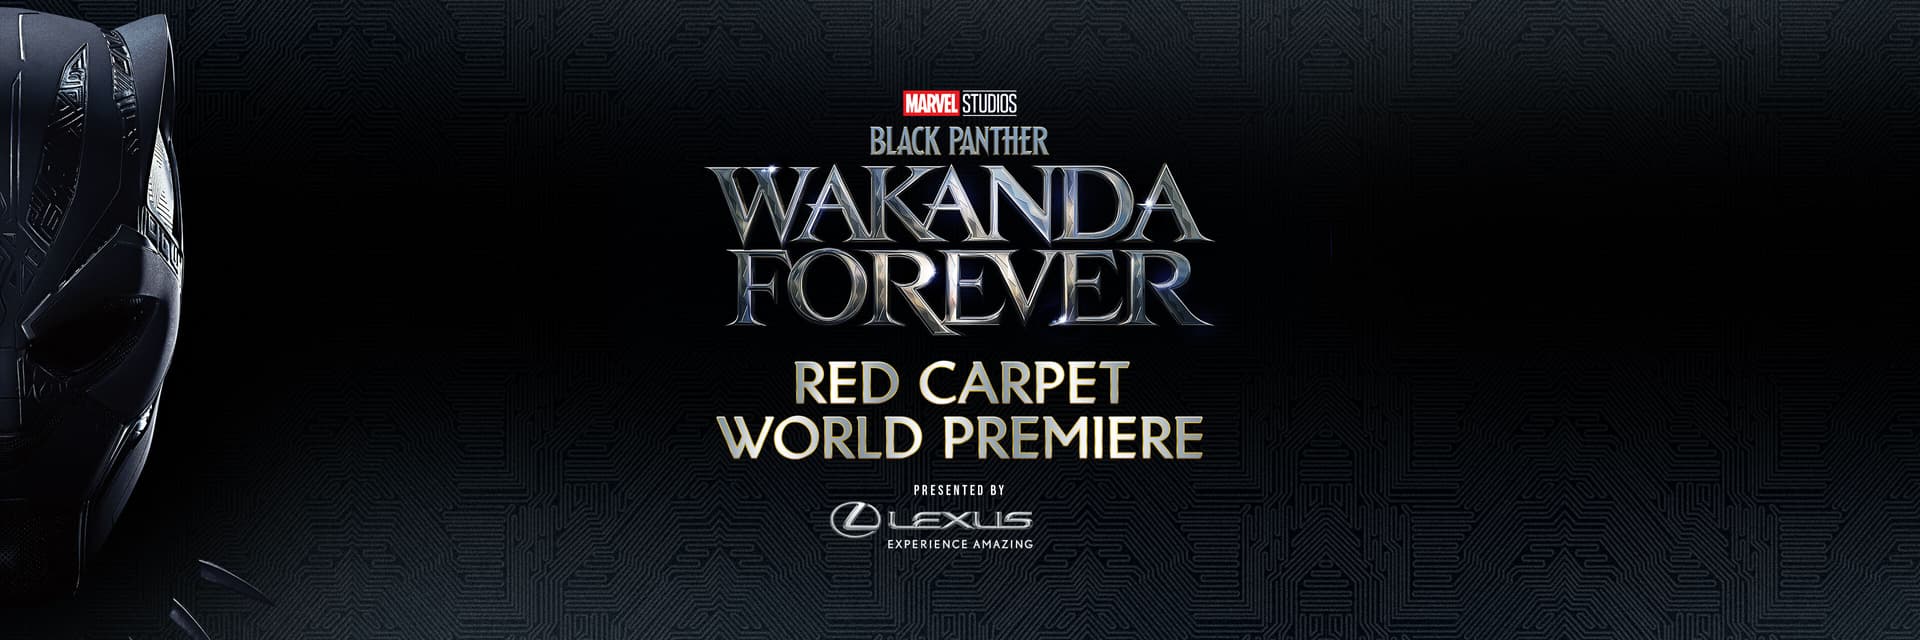 Black Panther: Wakanda Forever Live Red Carpet Premiere